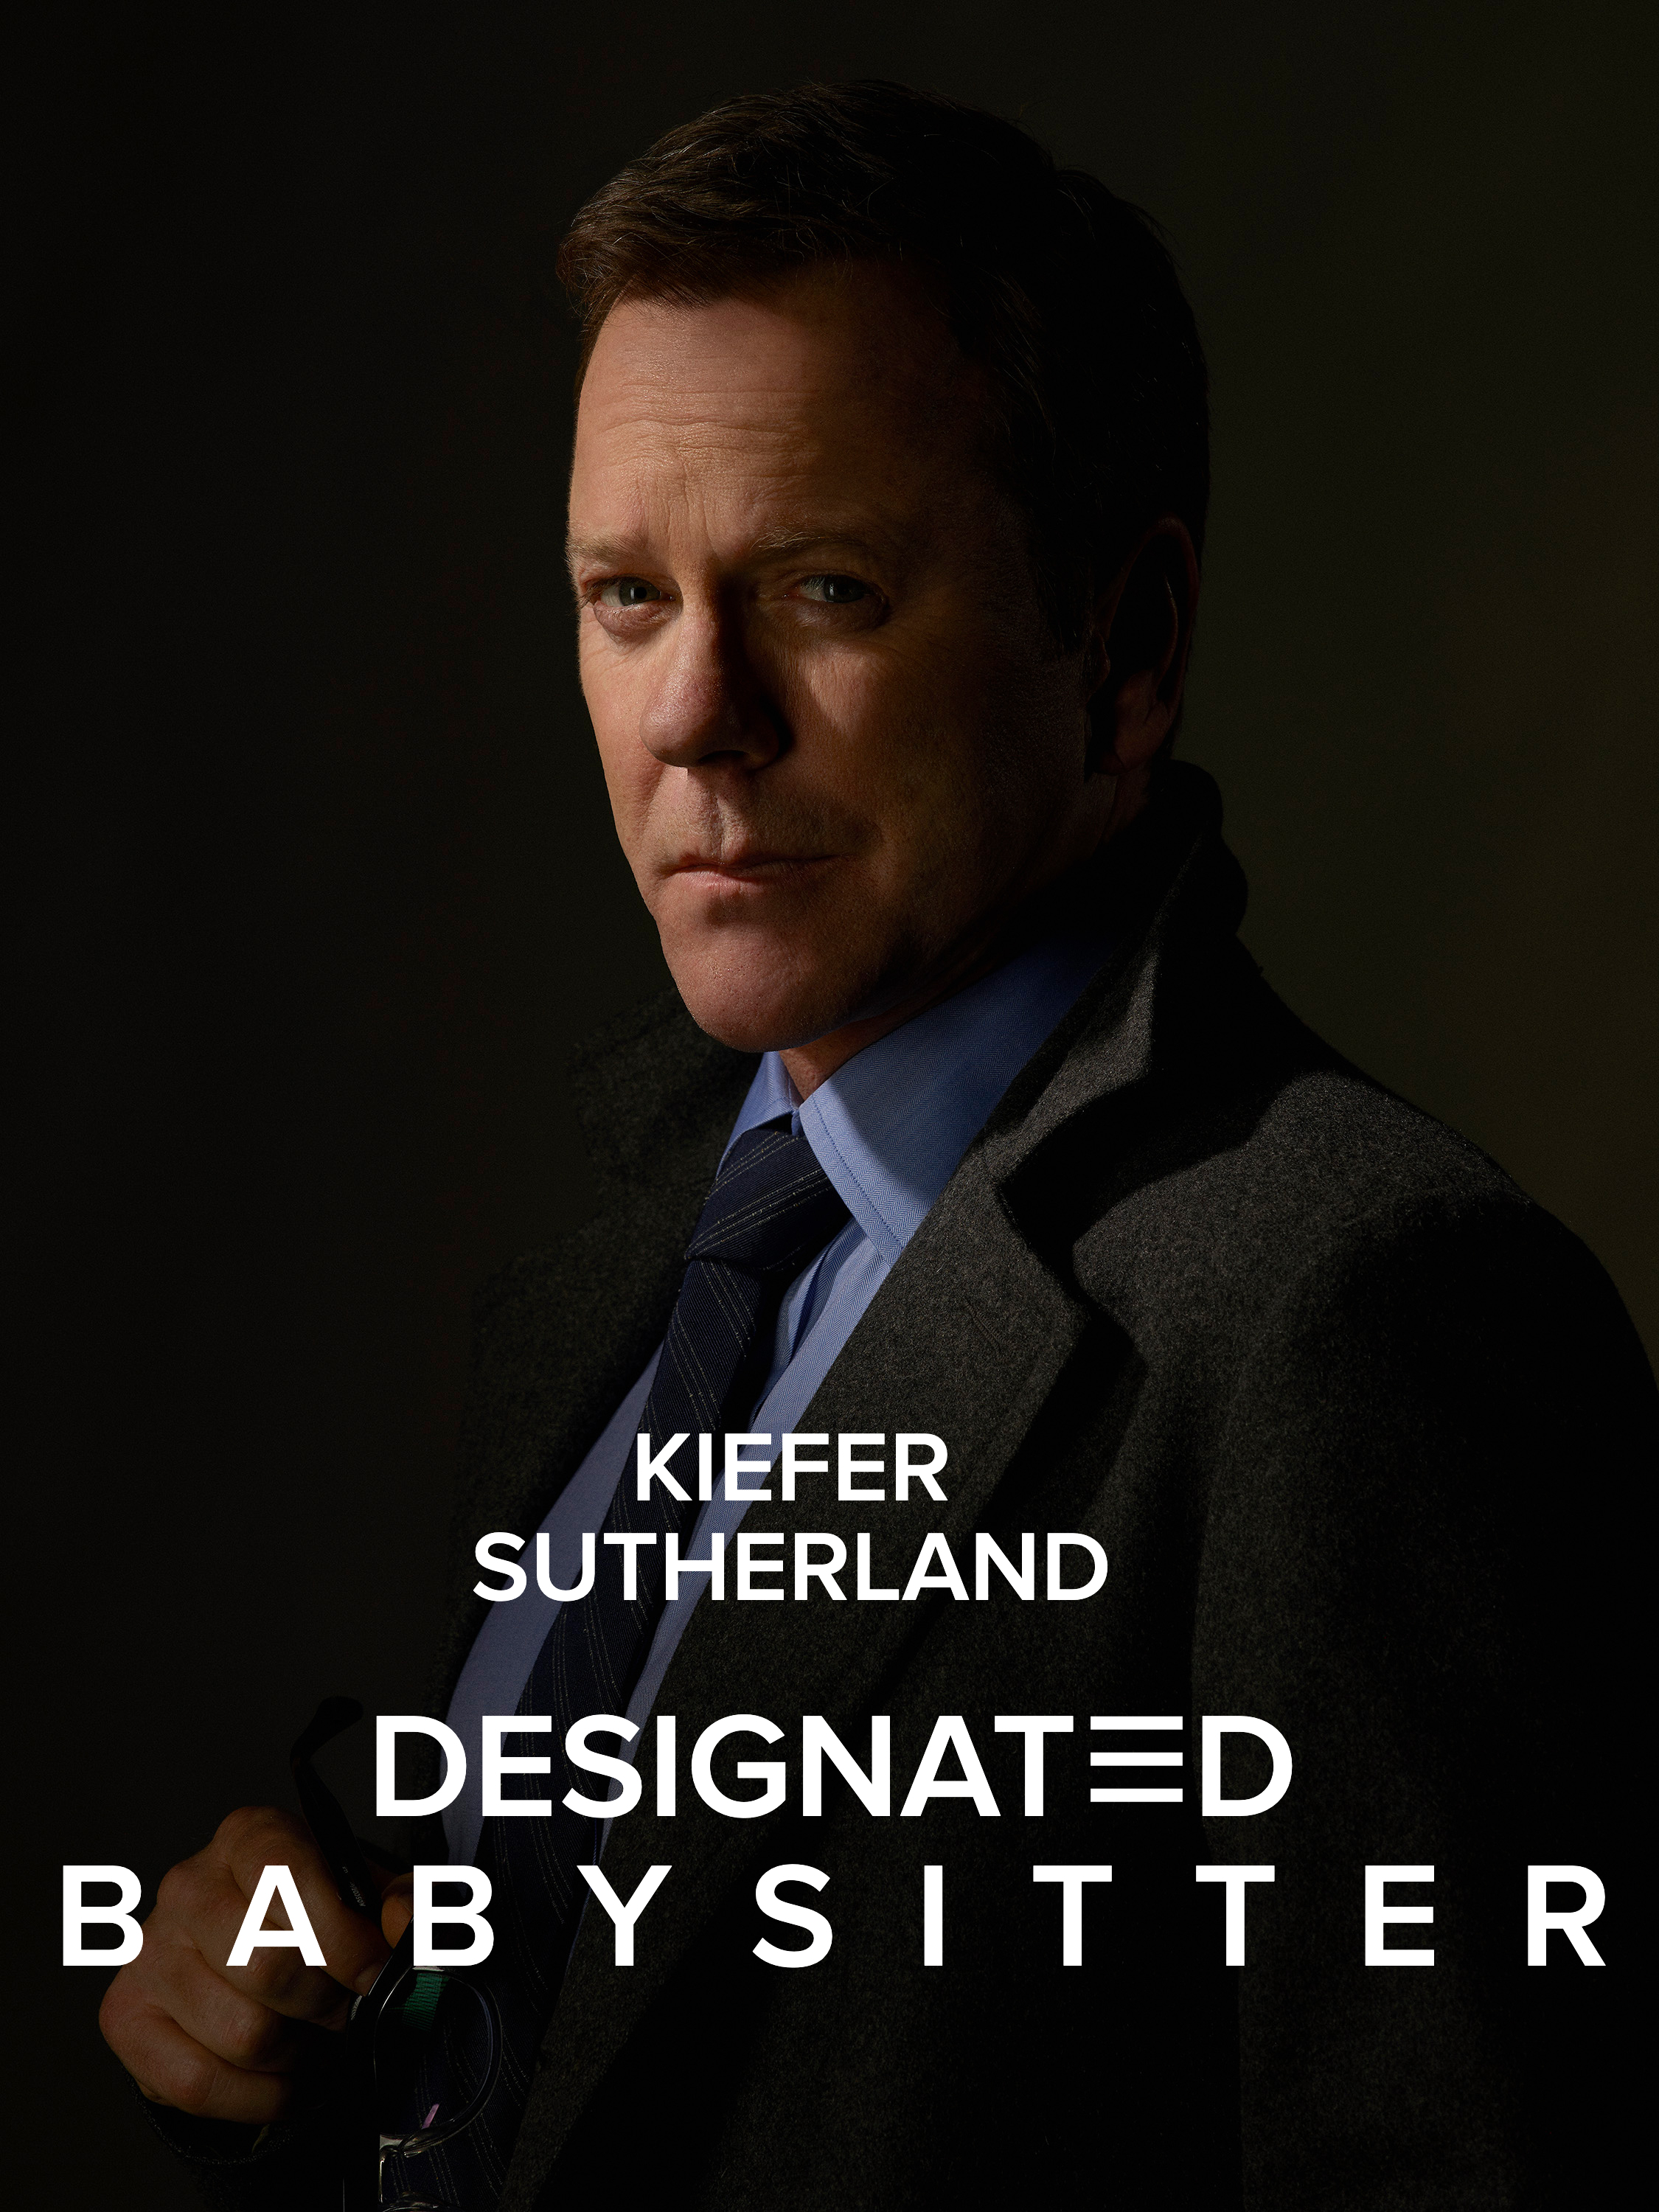 Kiefer in a tailored suit and tie holding glasses, posing with a serious expression, with caption &quot;Kiefer Sutherland Designated Babysitter&quot;